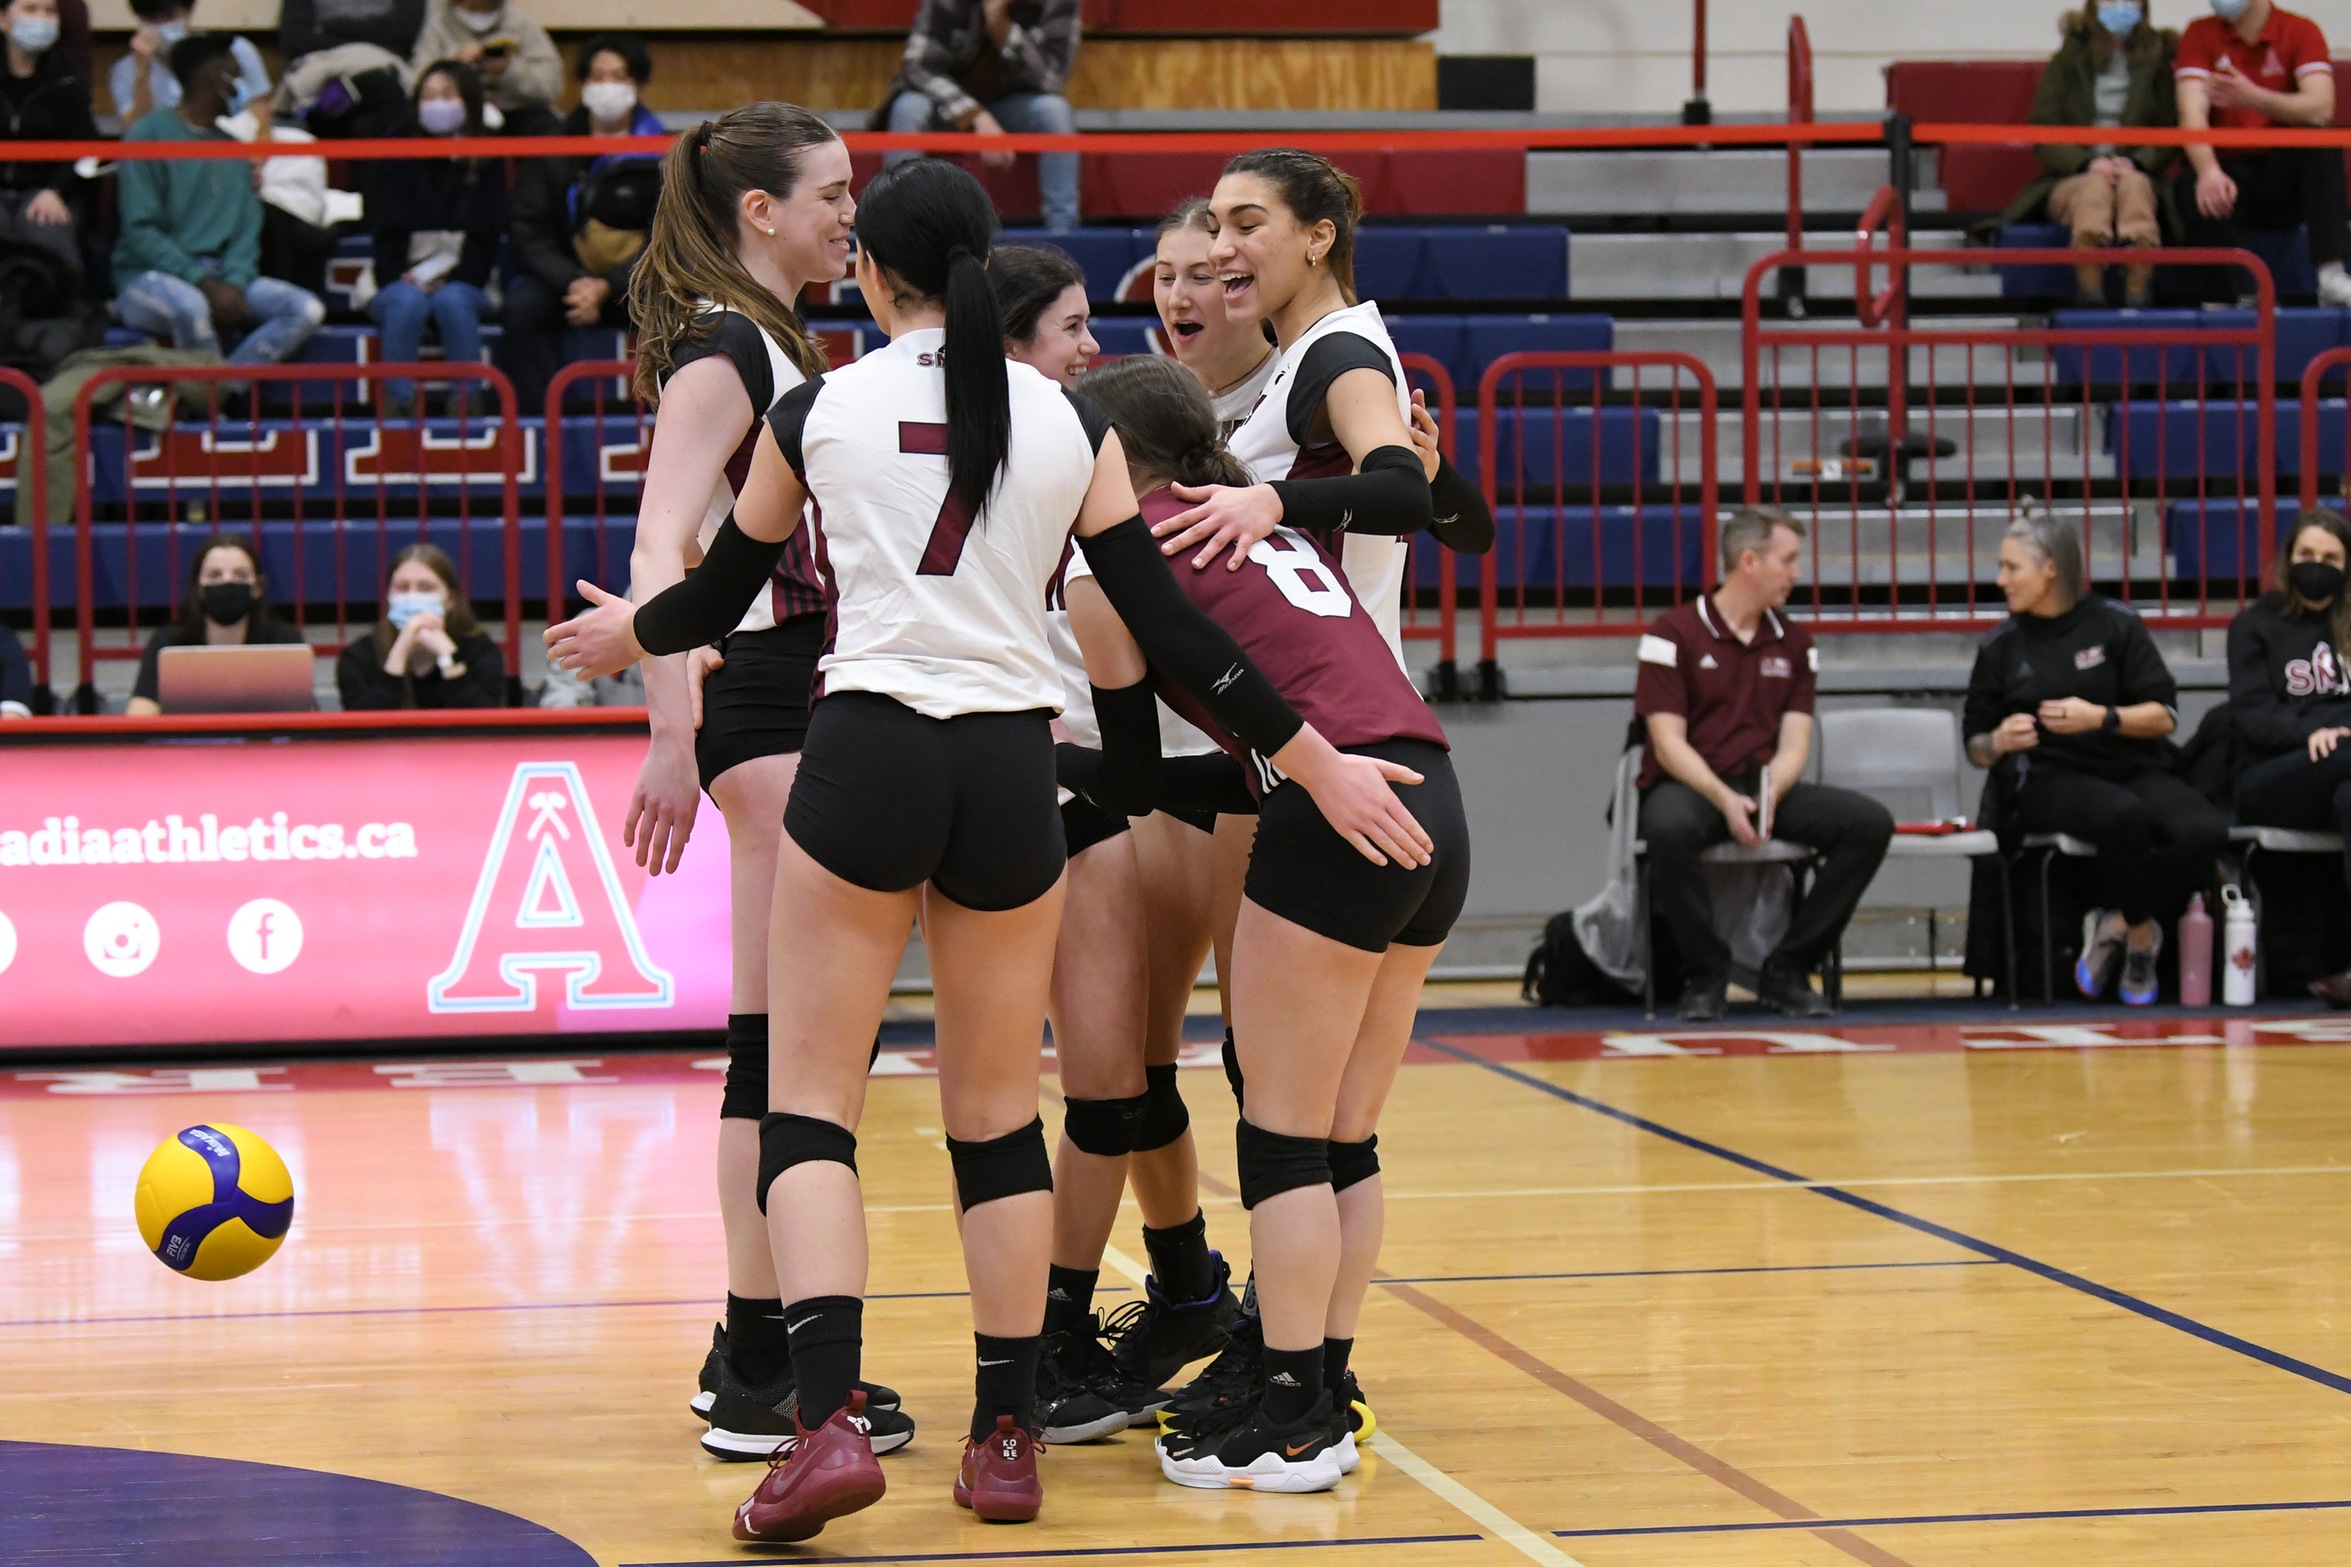 The Acadia Axewomen volleyball team defeated the Saint Mary’s Huskies 3–2 (20–25 24–26 25–20 25–22 15–12) in a thrilling five-set match on Saturday, Feb. 26 in Wolfville, NS.
(Photo provided by Acadia Athletics)